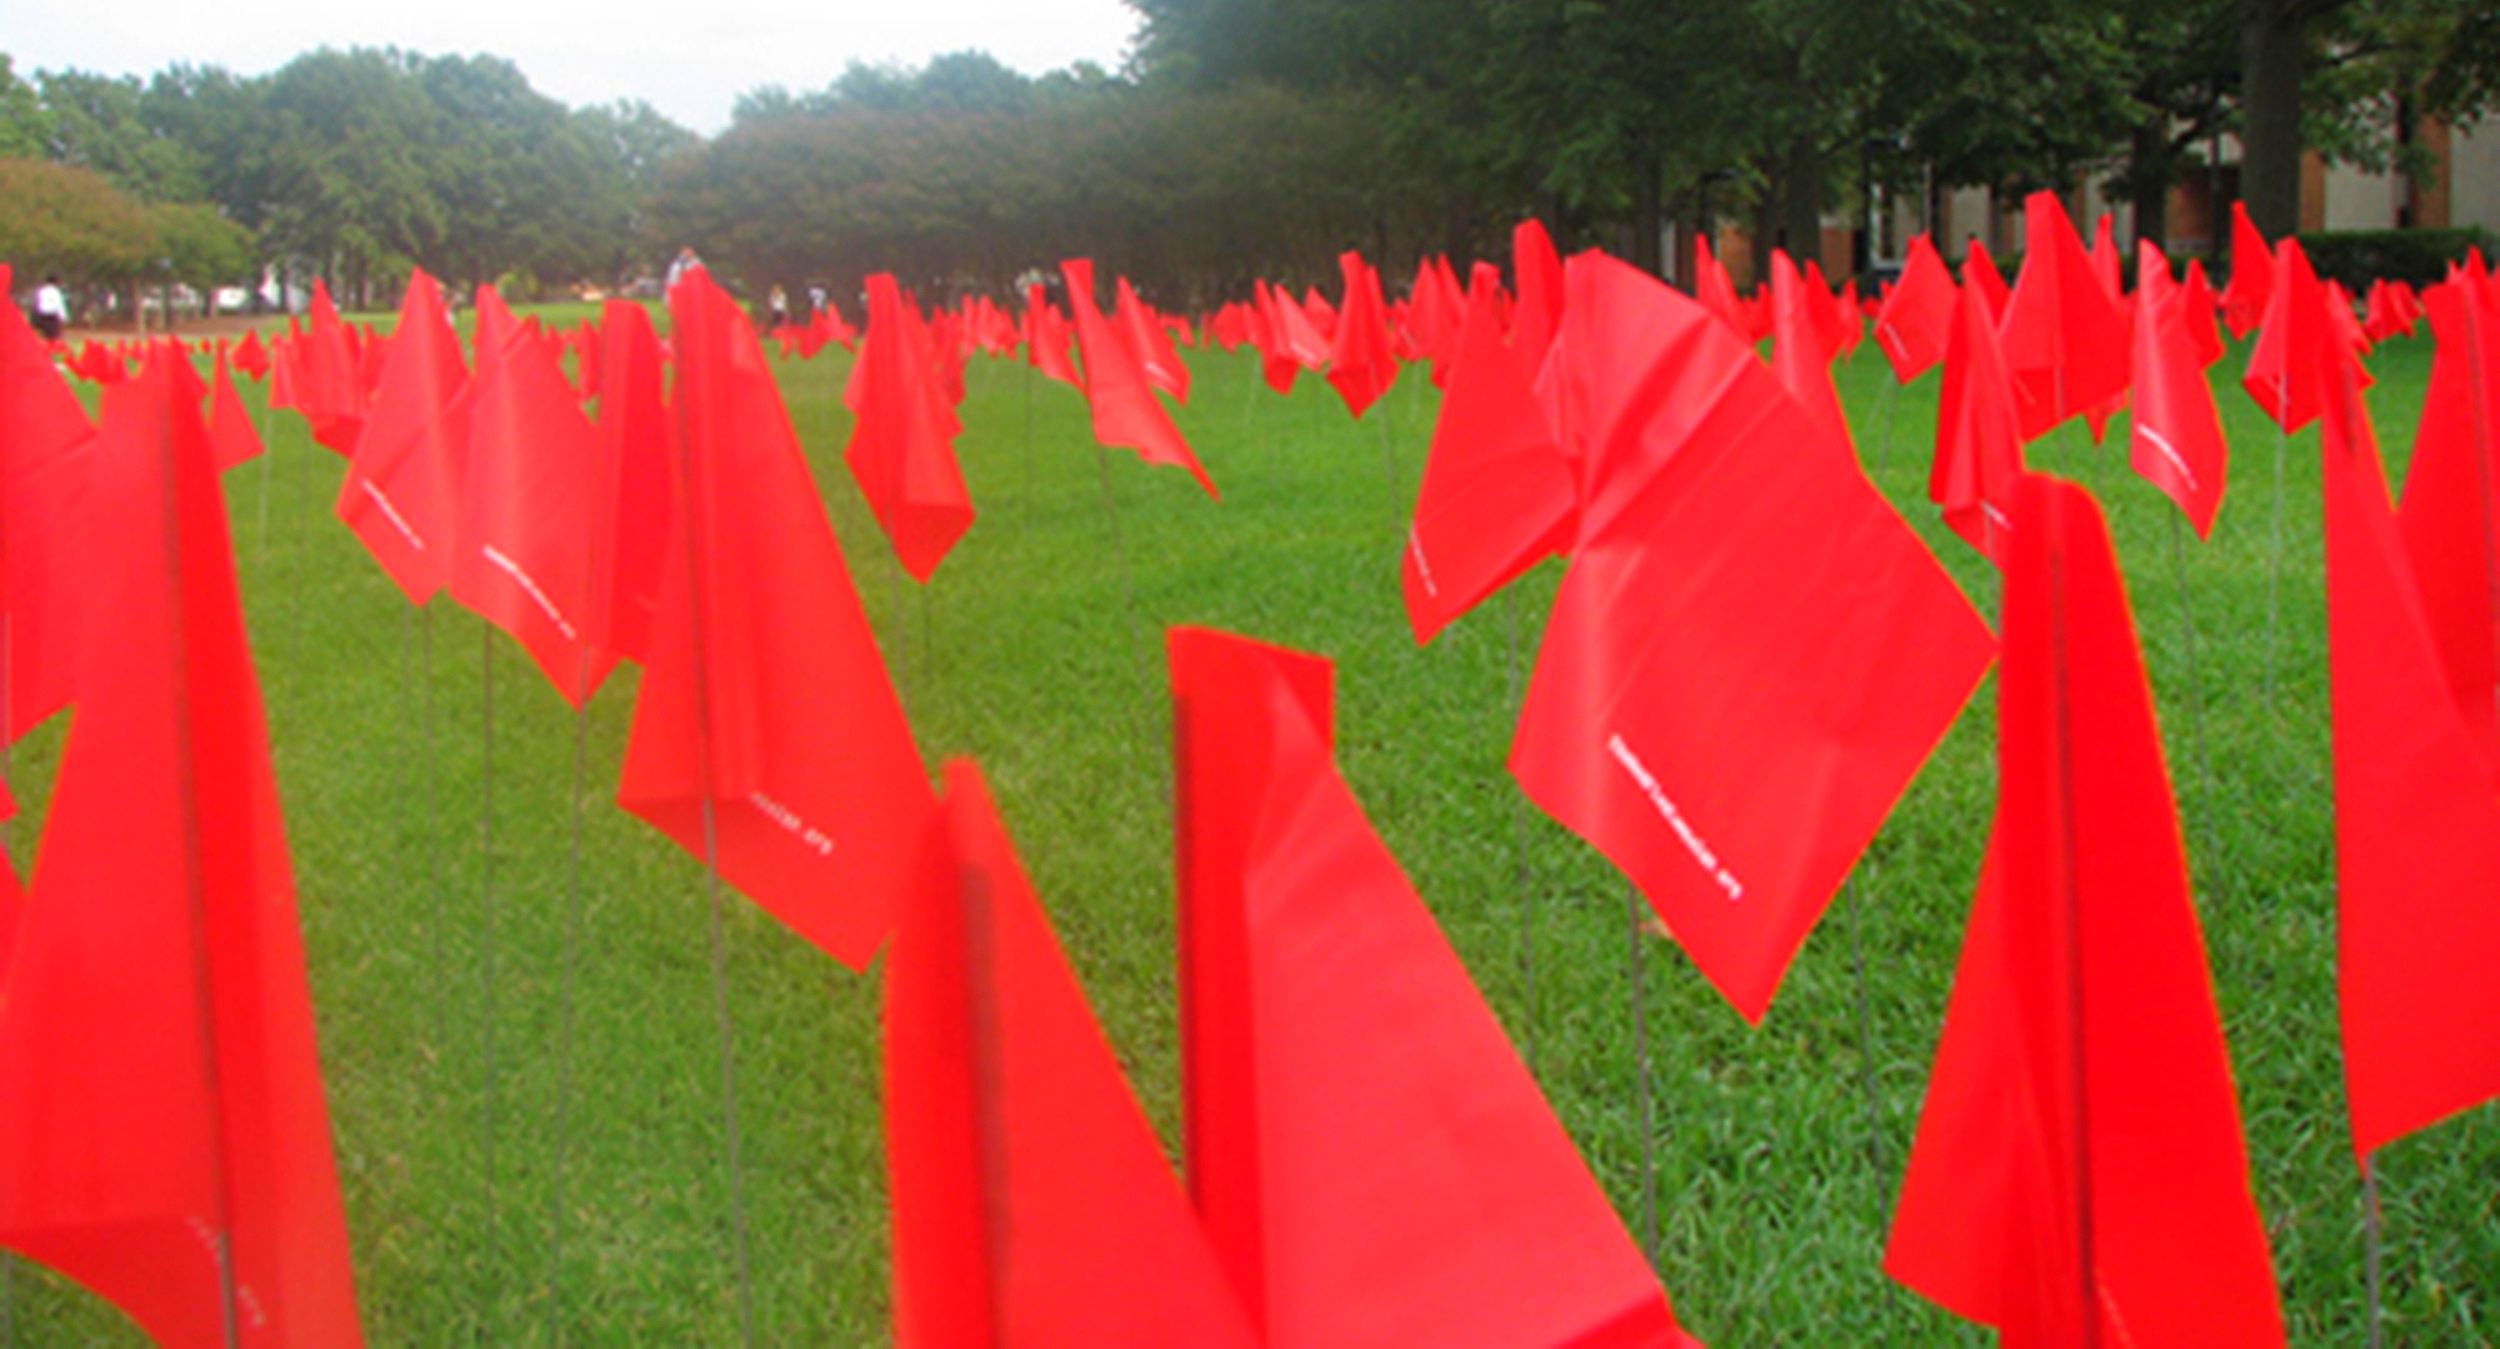 red+flags+on+lawn+enlarged.jpg?format=25